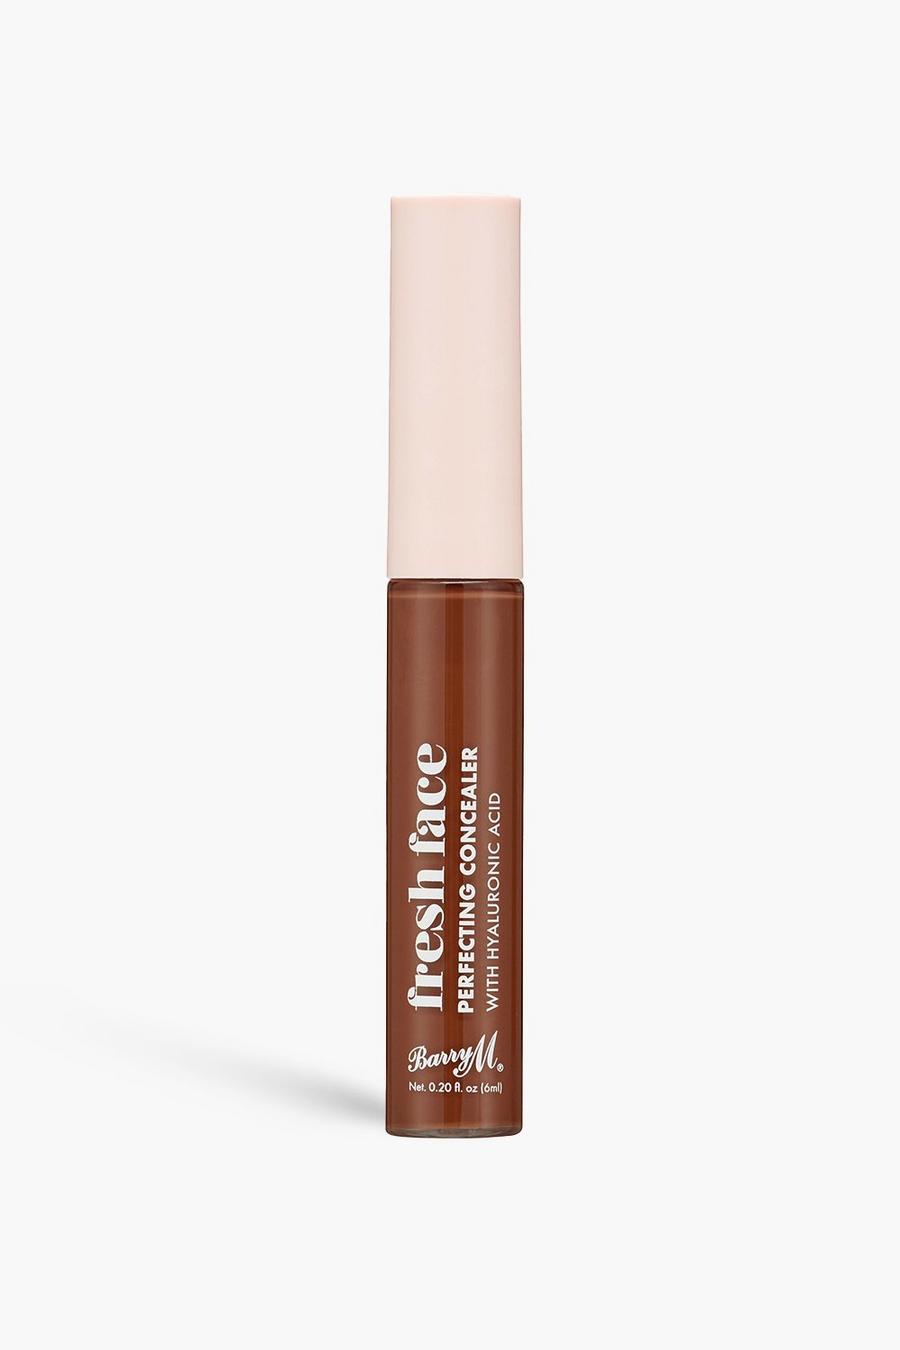 Barry M Fresh Face Perfecting Concealer 19, Brown braun